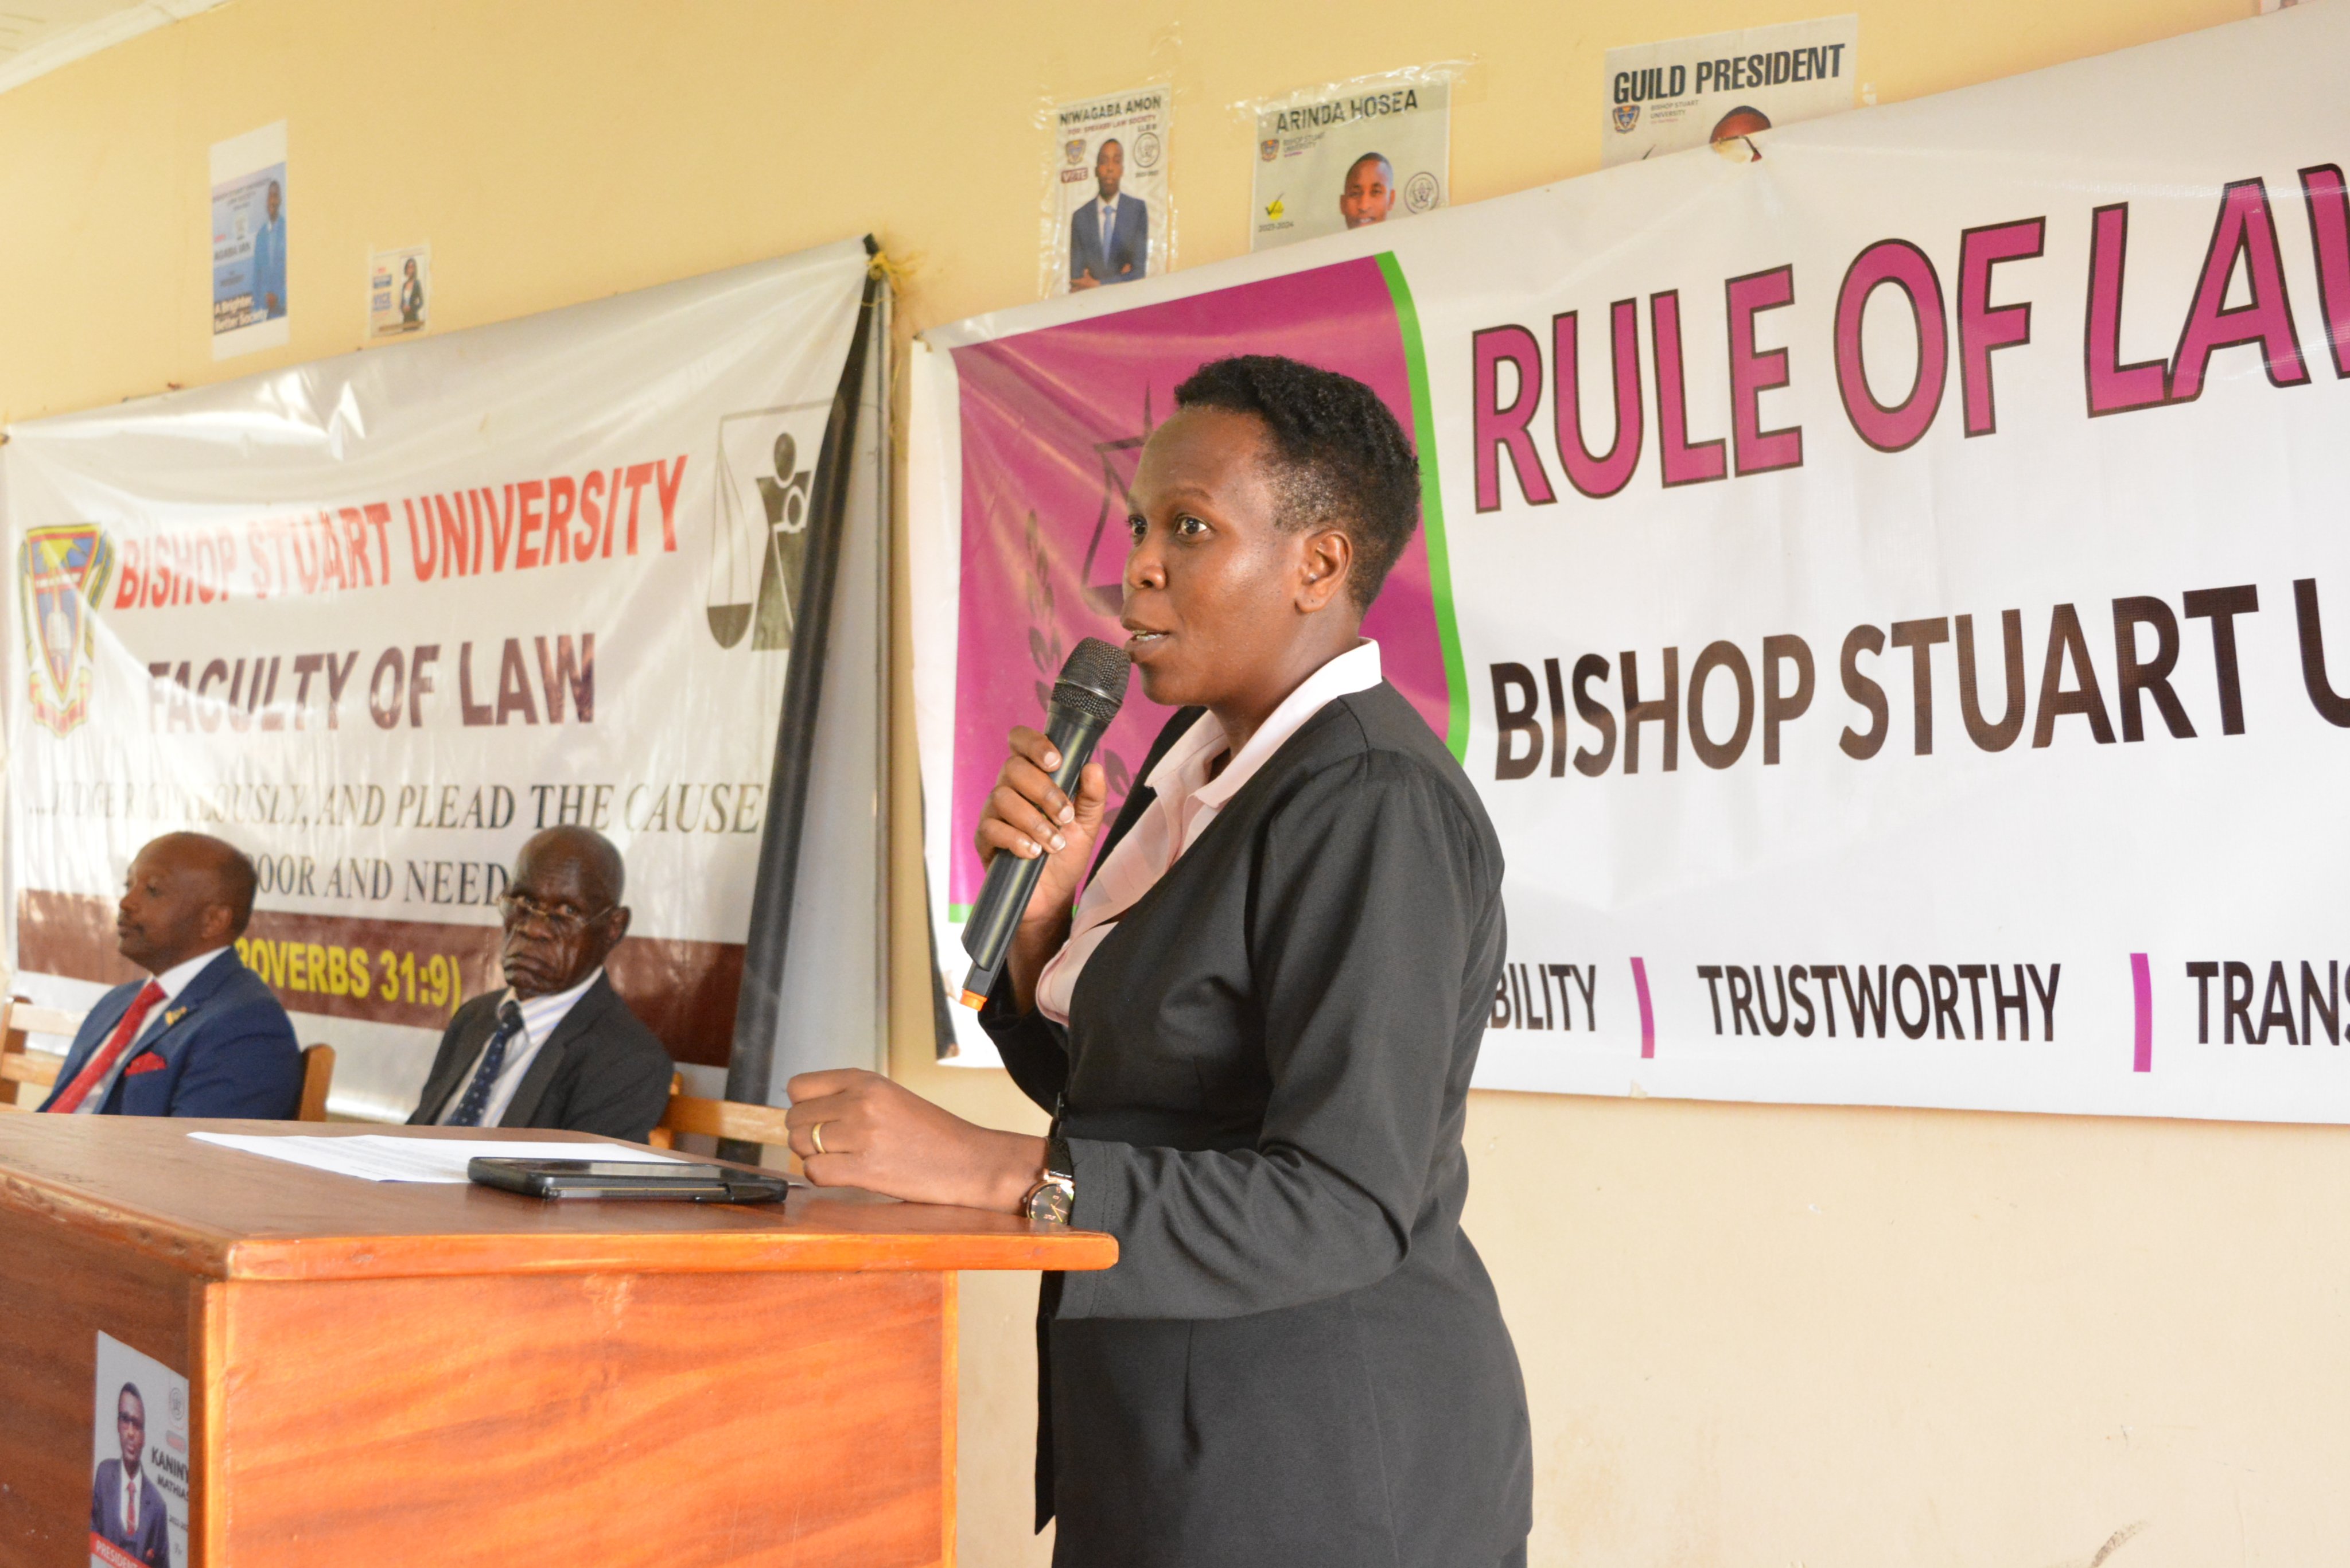 Head of Law Department, Counsel Twikirize Parton delivers her welcome remarks at the event